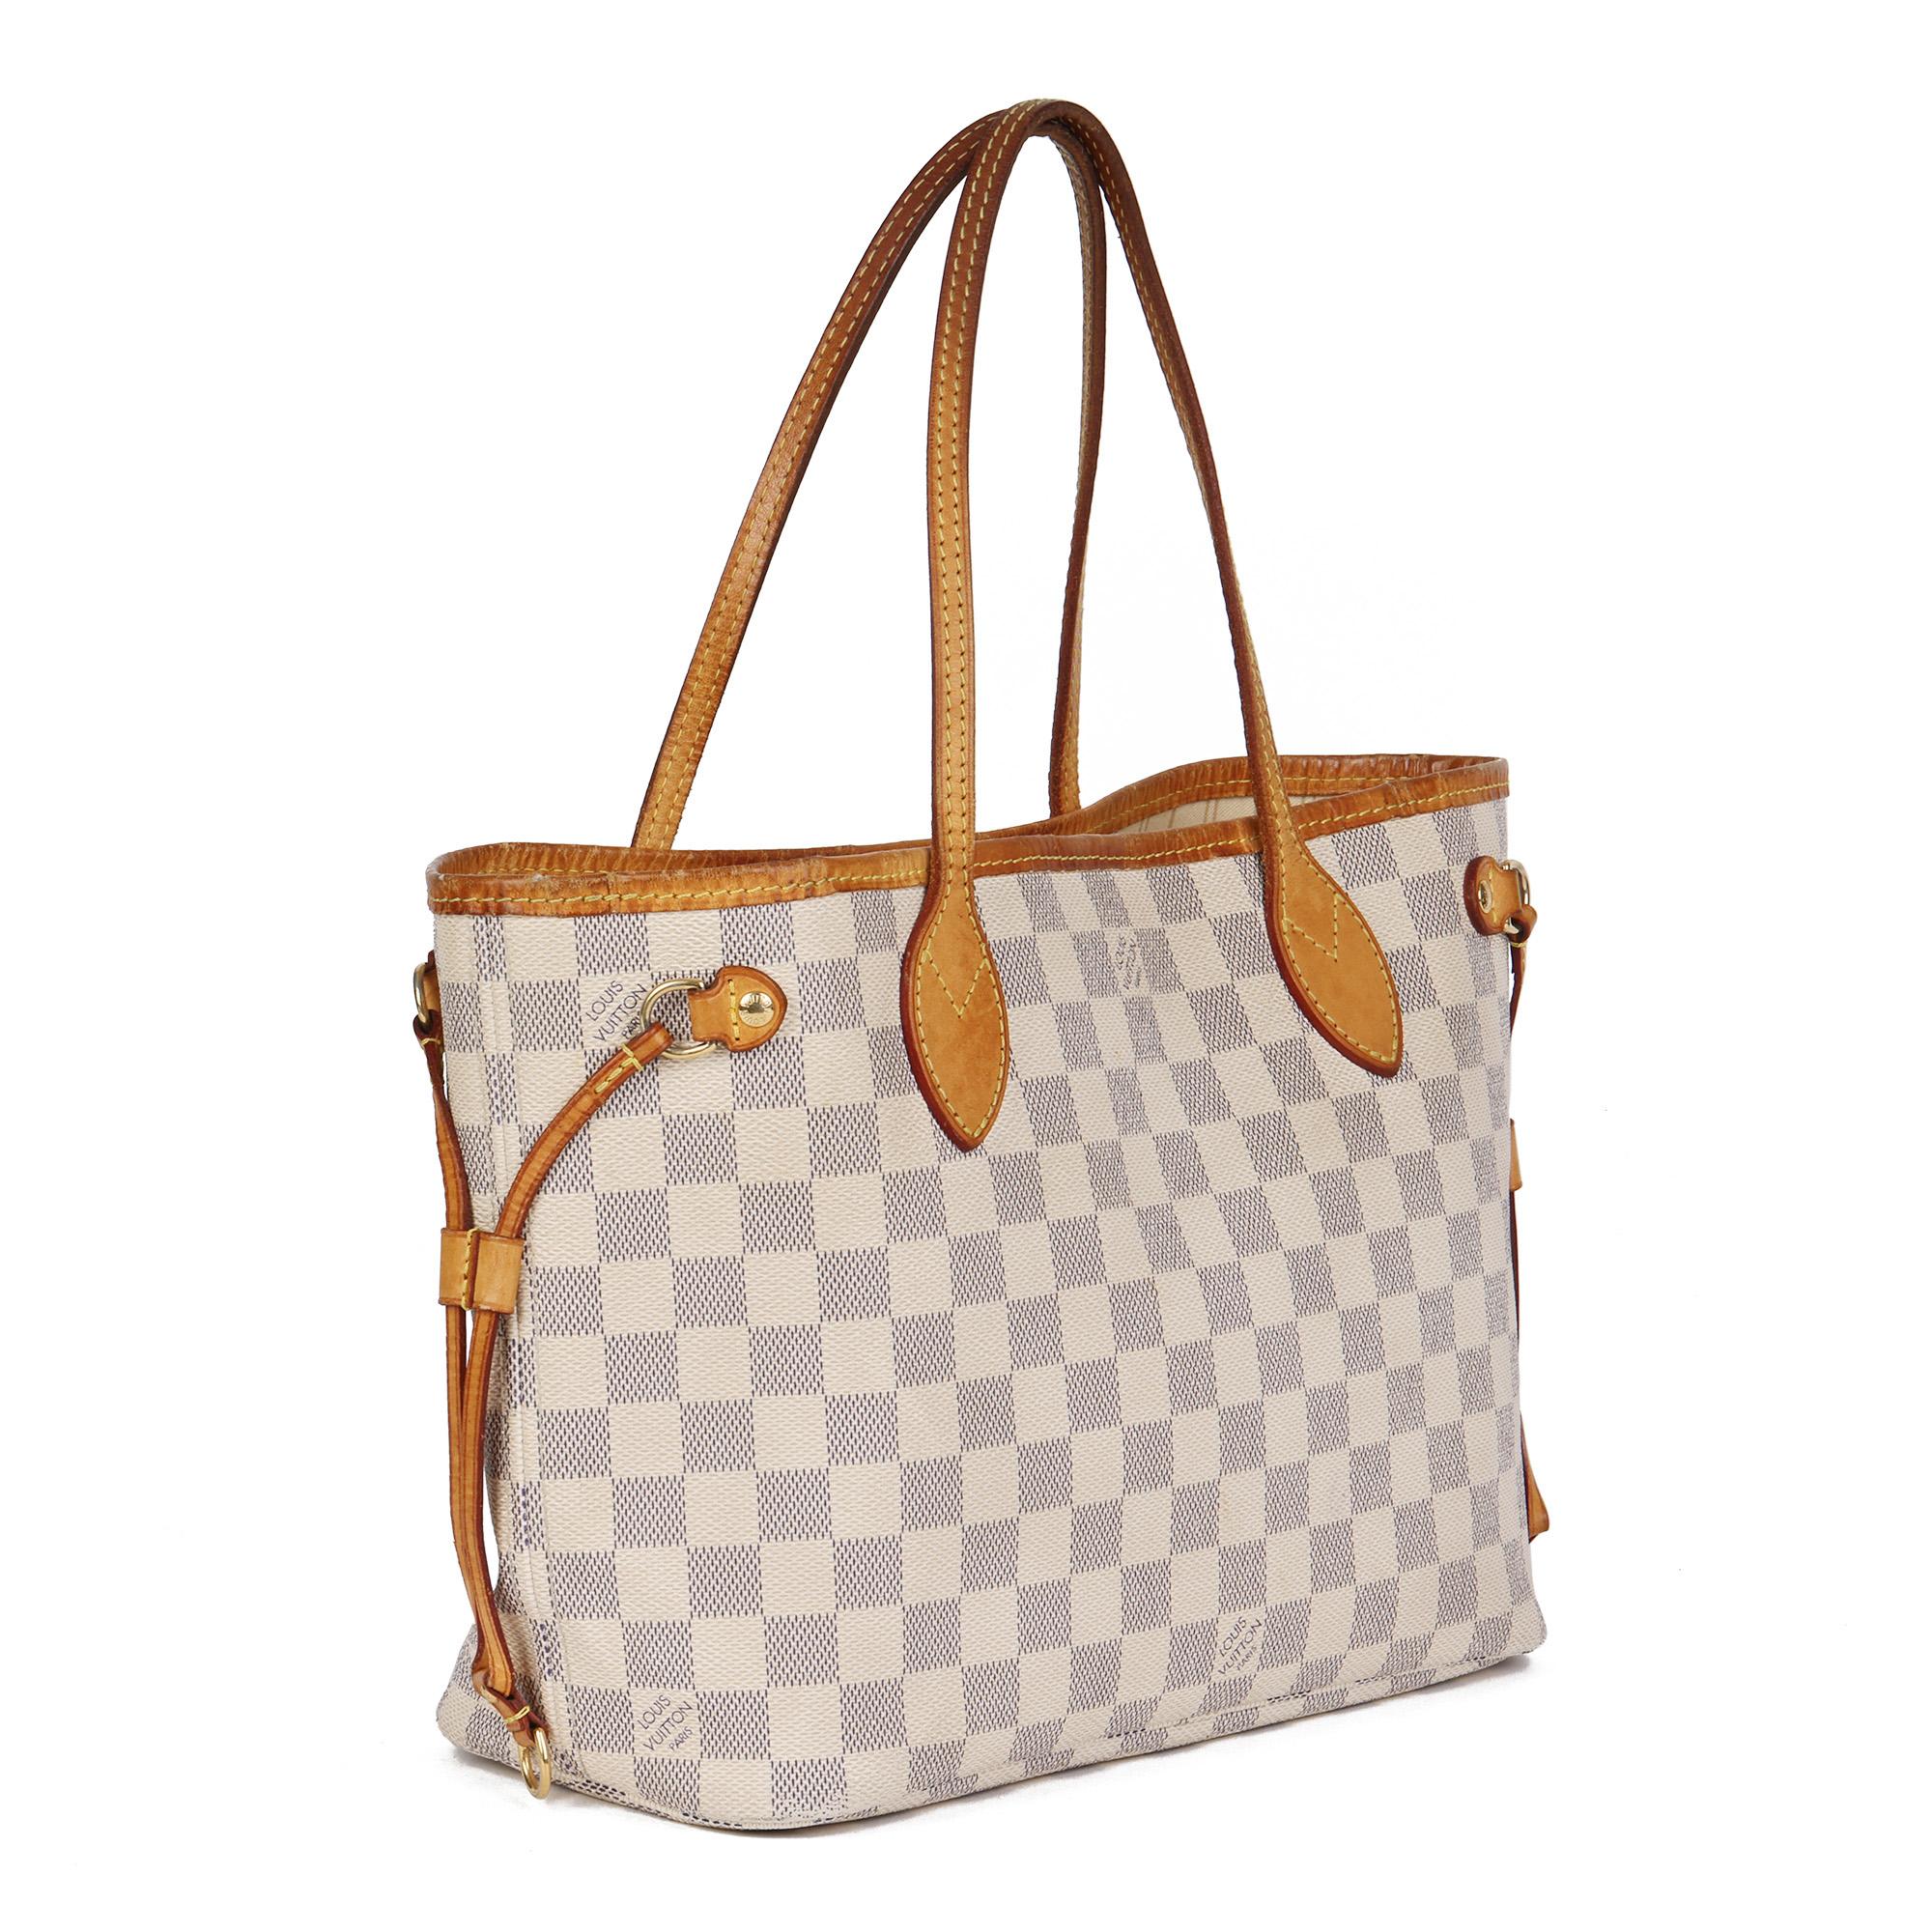 LOUIS VUITTON
Damier Azur Coated Canvas Neverfull PM

Xupes Reference: CB634
Serial Number: VI 0150
Age (Circa): 2010
Authenticity Details: Date Stamp (Made in France)
Gender: Ladies
Type: Shoulder, Tote

Colour: Beige
Hardware: Golden Brass